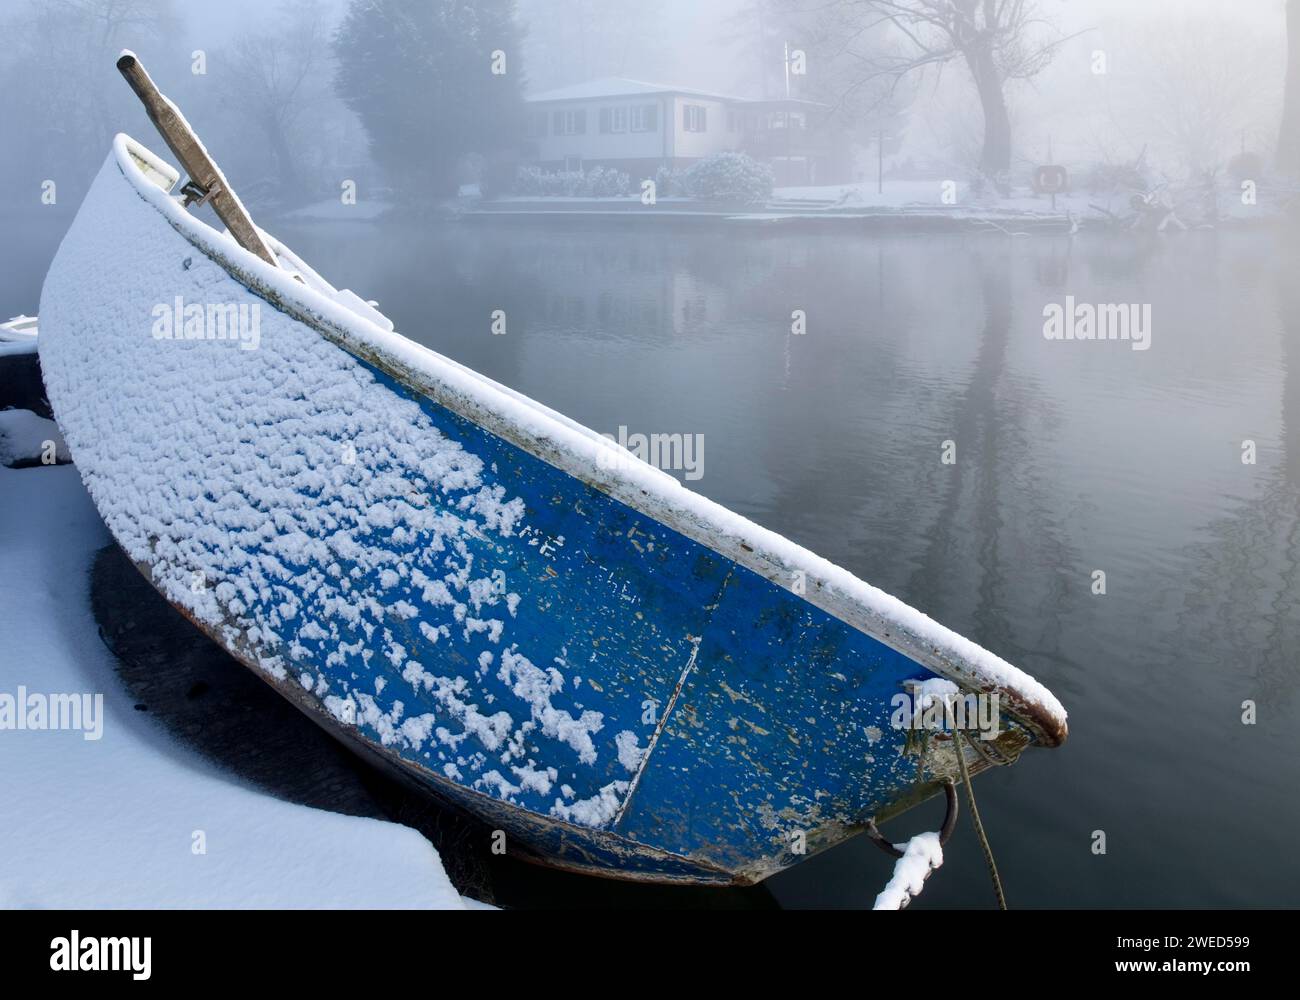 The Ruhr in winter with a snow-covered rowing boat and the Ruhr Island in the fog, Witten, Ruhr area, North Rhine-Westphalia, Germany Stock Photo